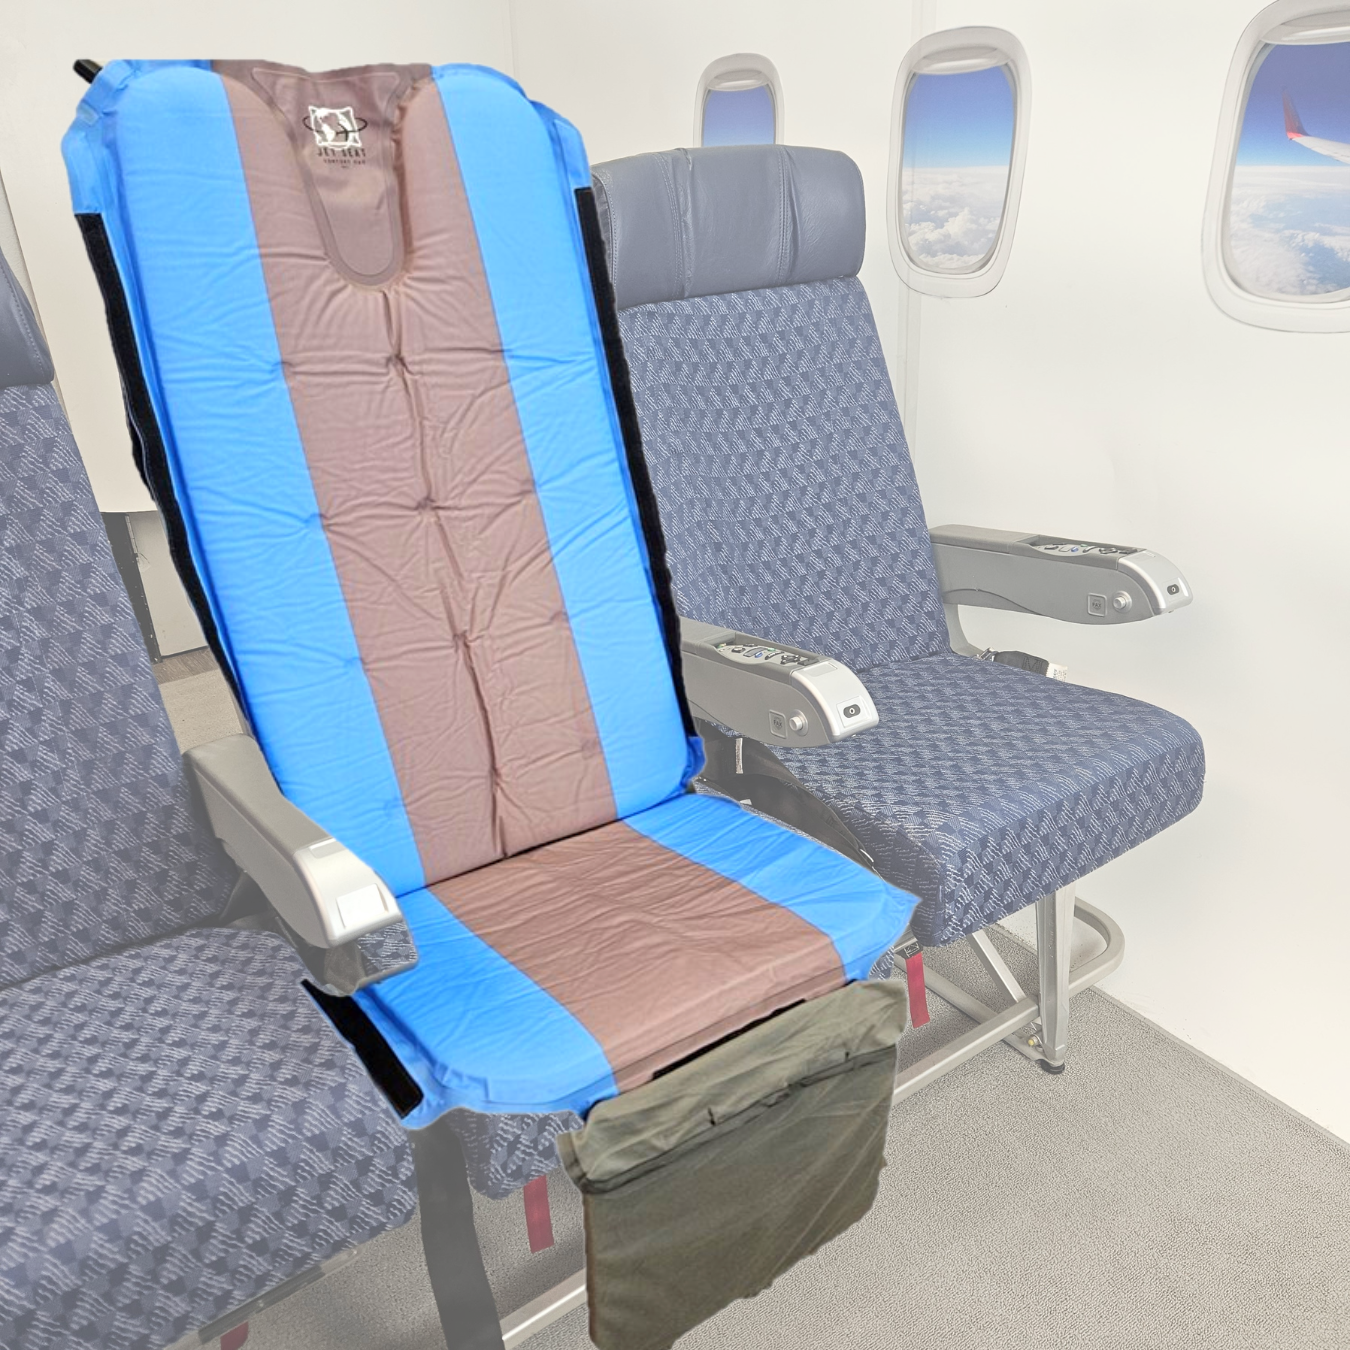 Jet Seat airplane cushion great for travel on planes and trains prevent back pain sciatica self-inflating foldable